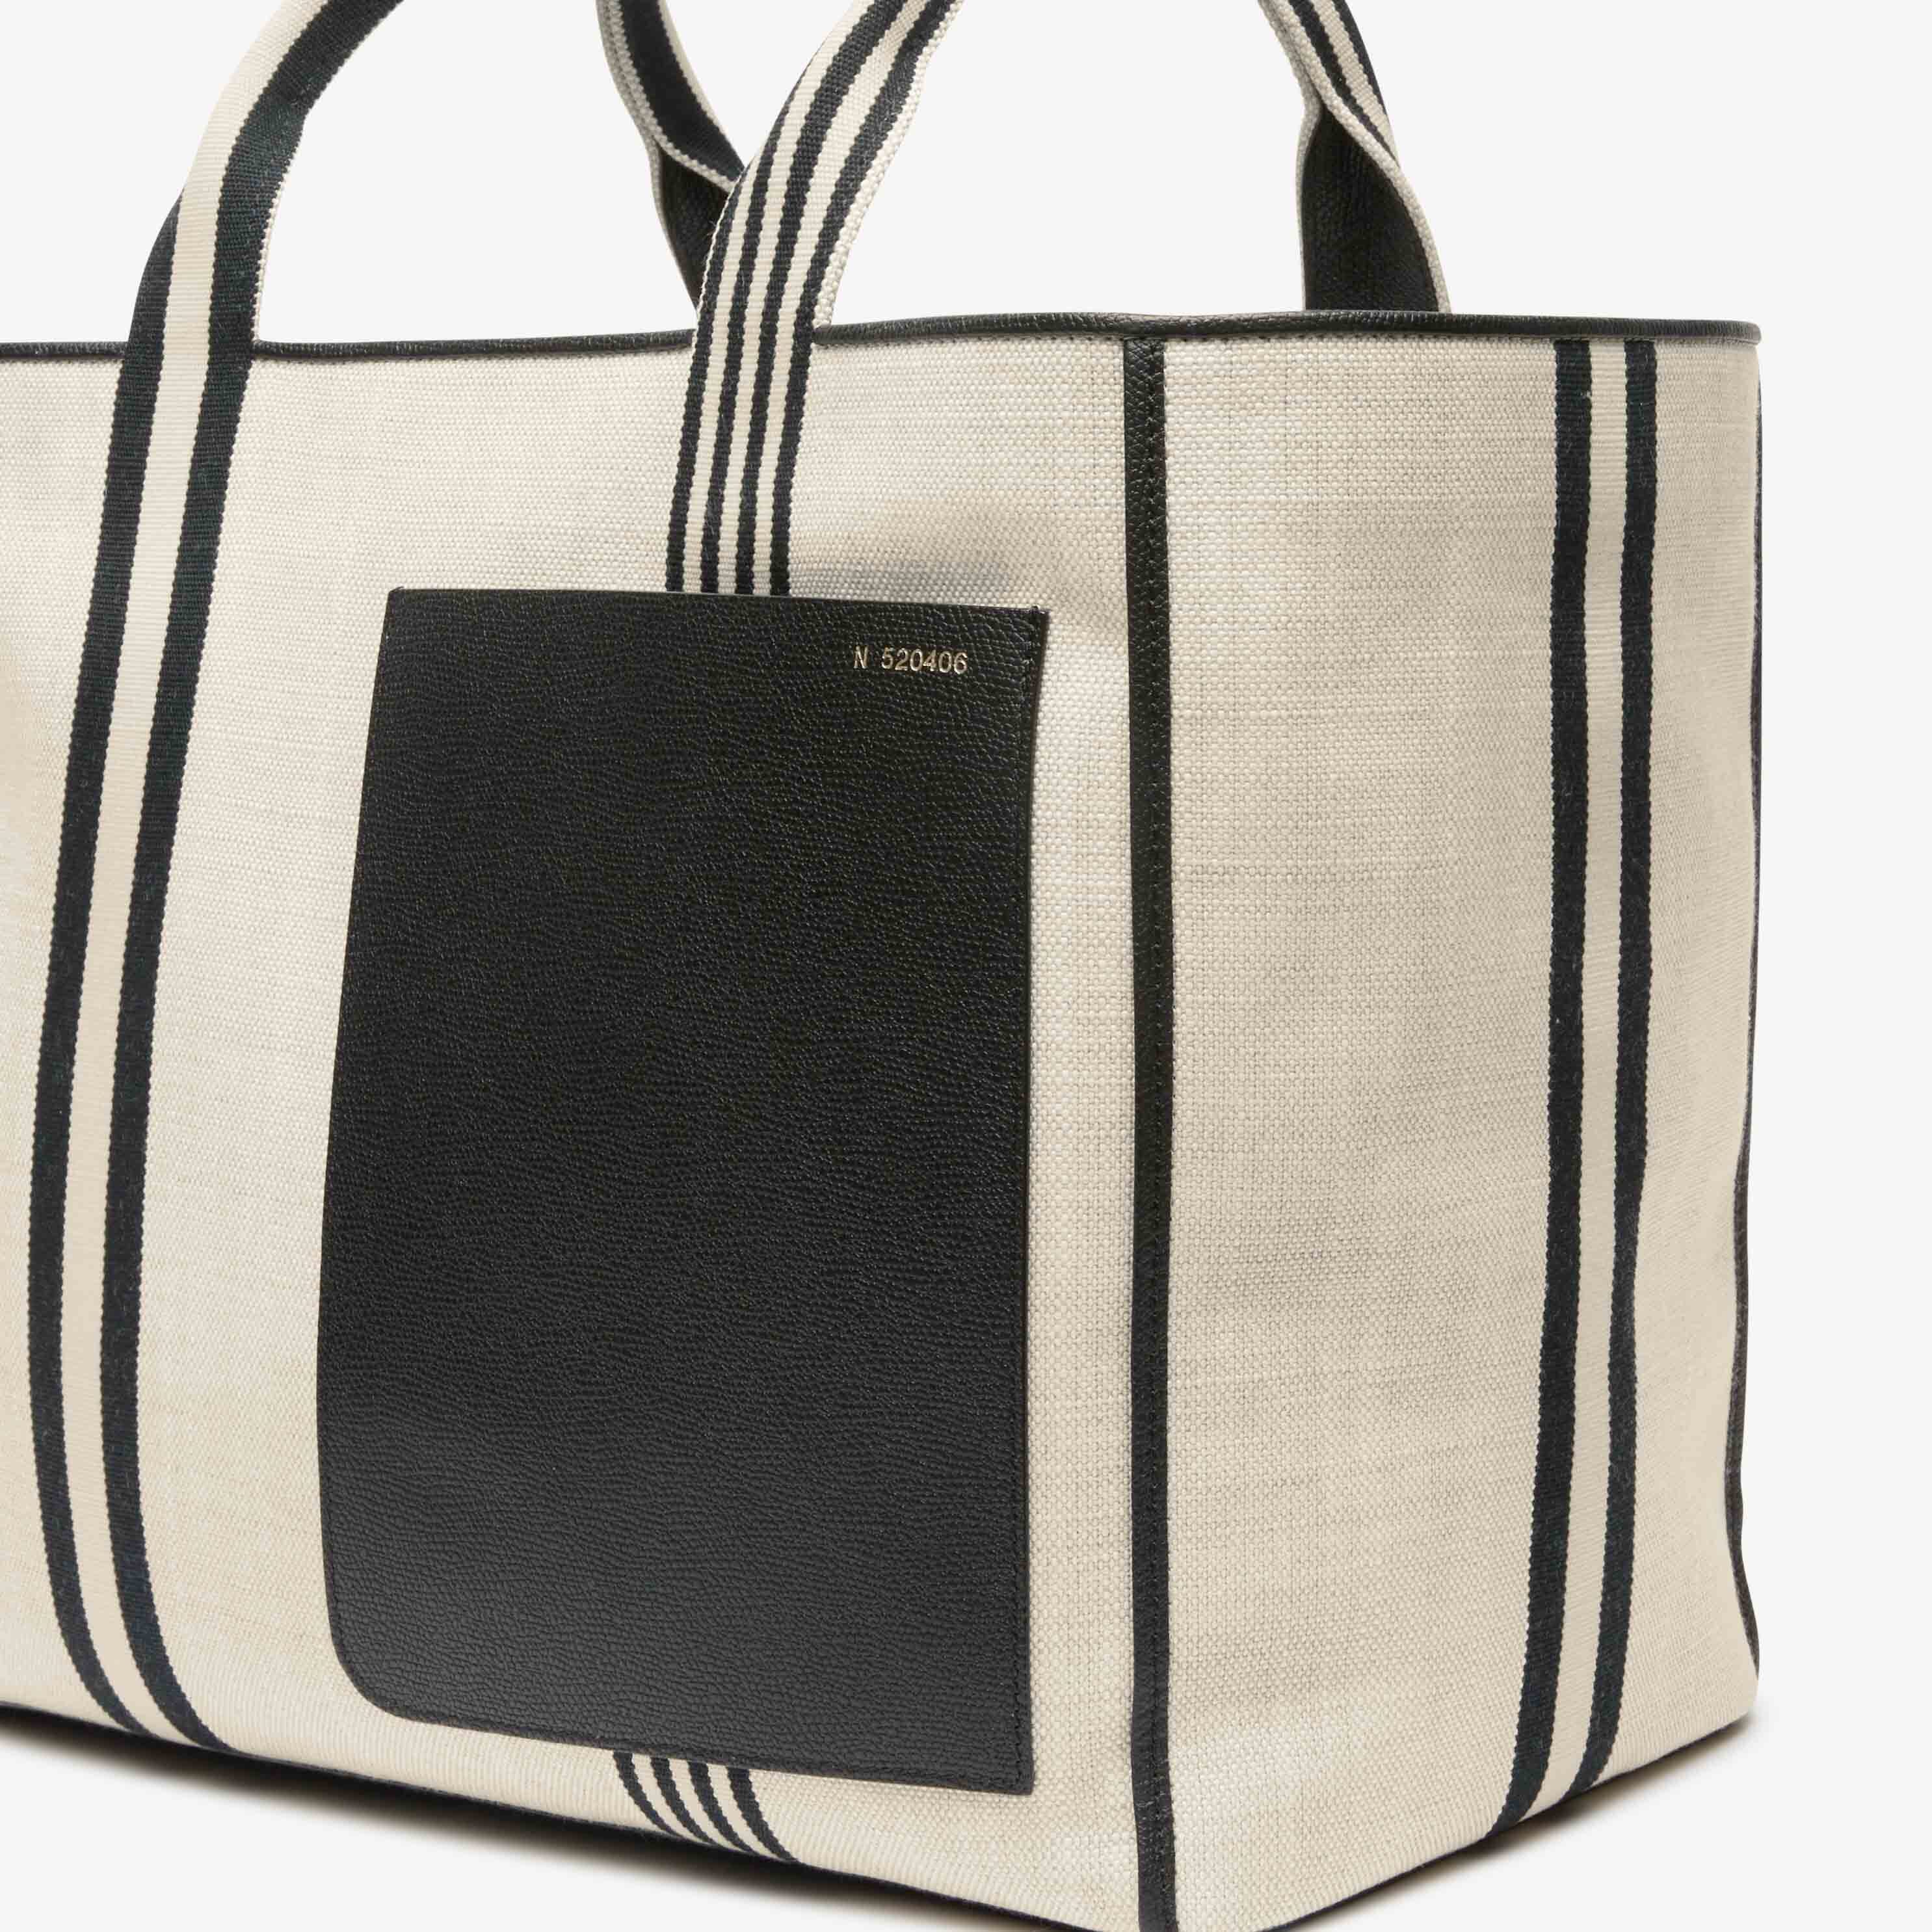 Linear Fabric Large Tote Bag - Sand Brown/Black - Tessuto Linear/VS - Valextra - 4